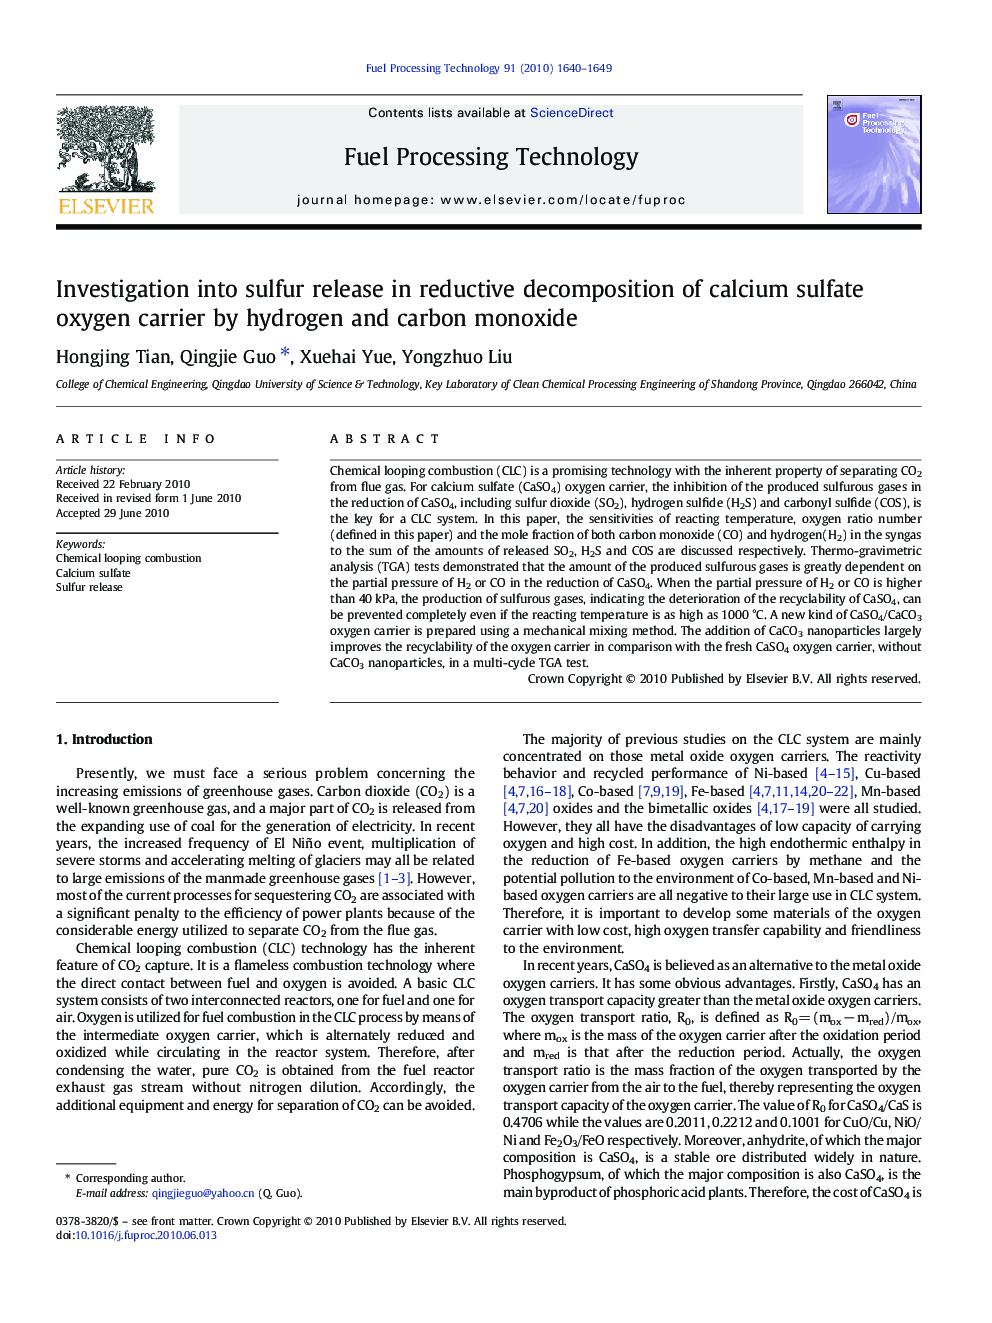 Investigation into sulfur release in reductive decomposition of calcium sulfate oxygen carrier by hydrogen and carbon monoxide